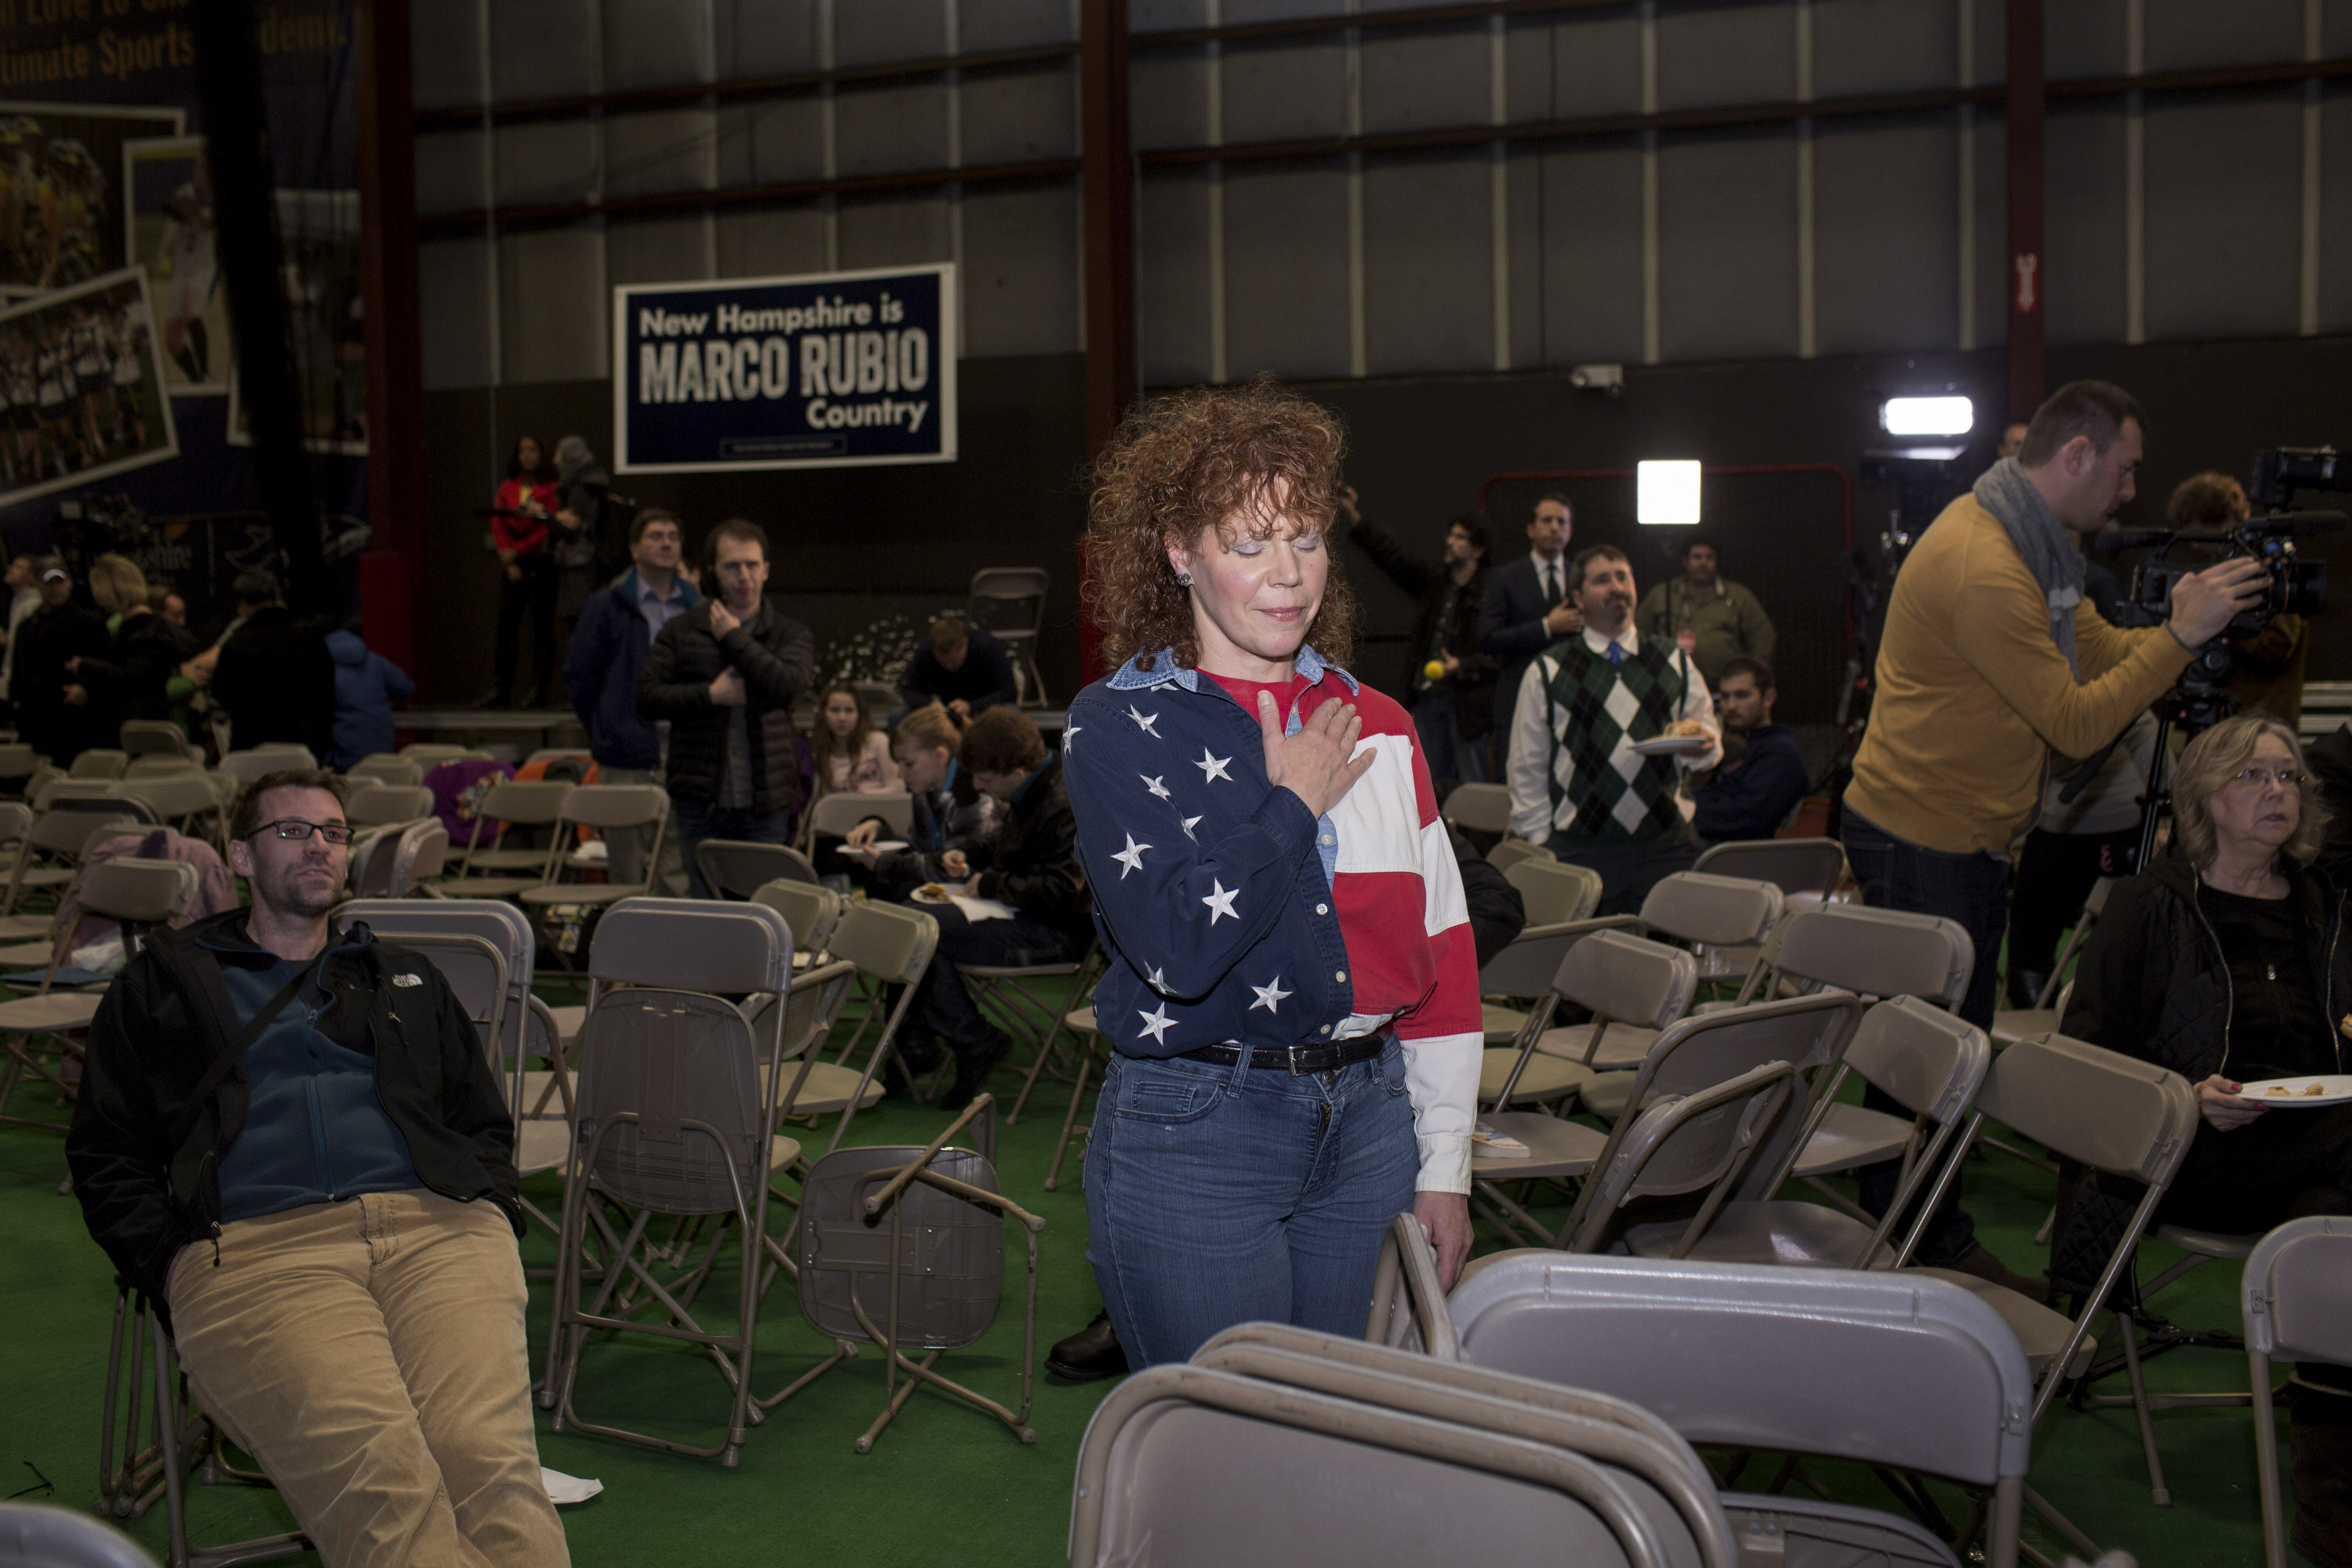 A supporter attends a campaign event for Republican presidential candidate Marco Rubio at the Ultimate Sports Academy in Manchester, N.H. on Feb. 7, 2016.